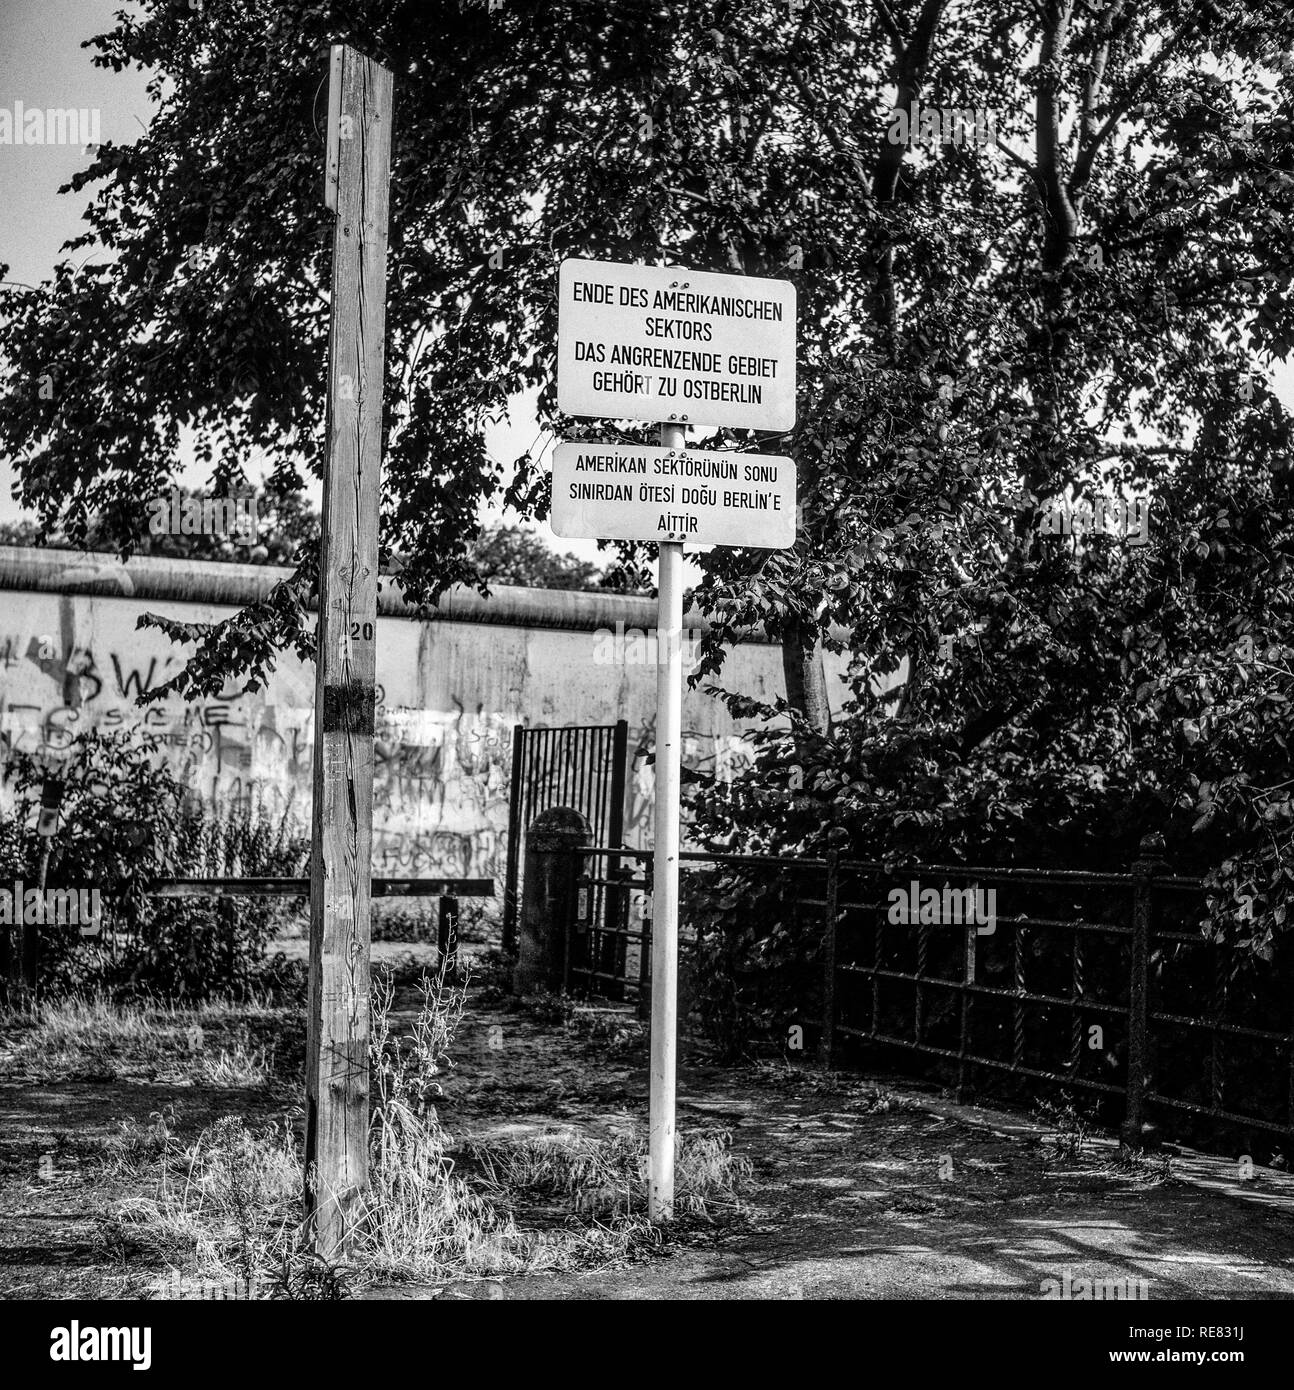 August 1986, warning sign for end of American sector in front of Berlin Wall, West Berlin side, Germany, Europe, Stock Photo